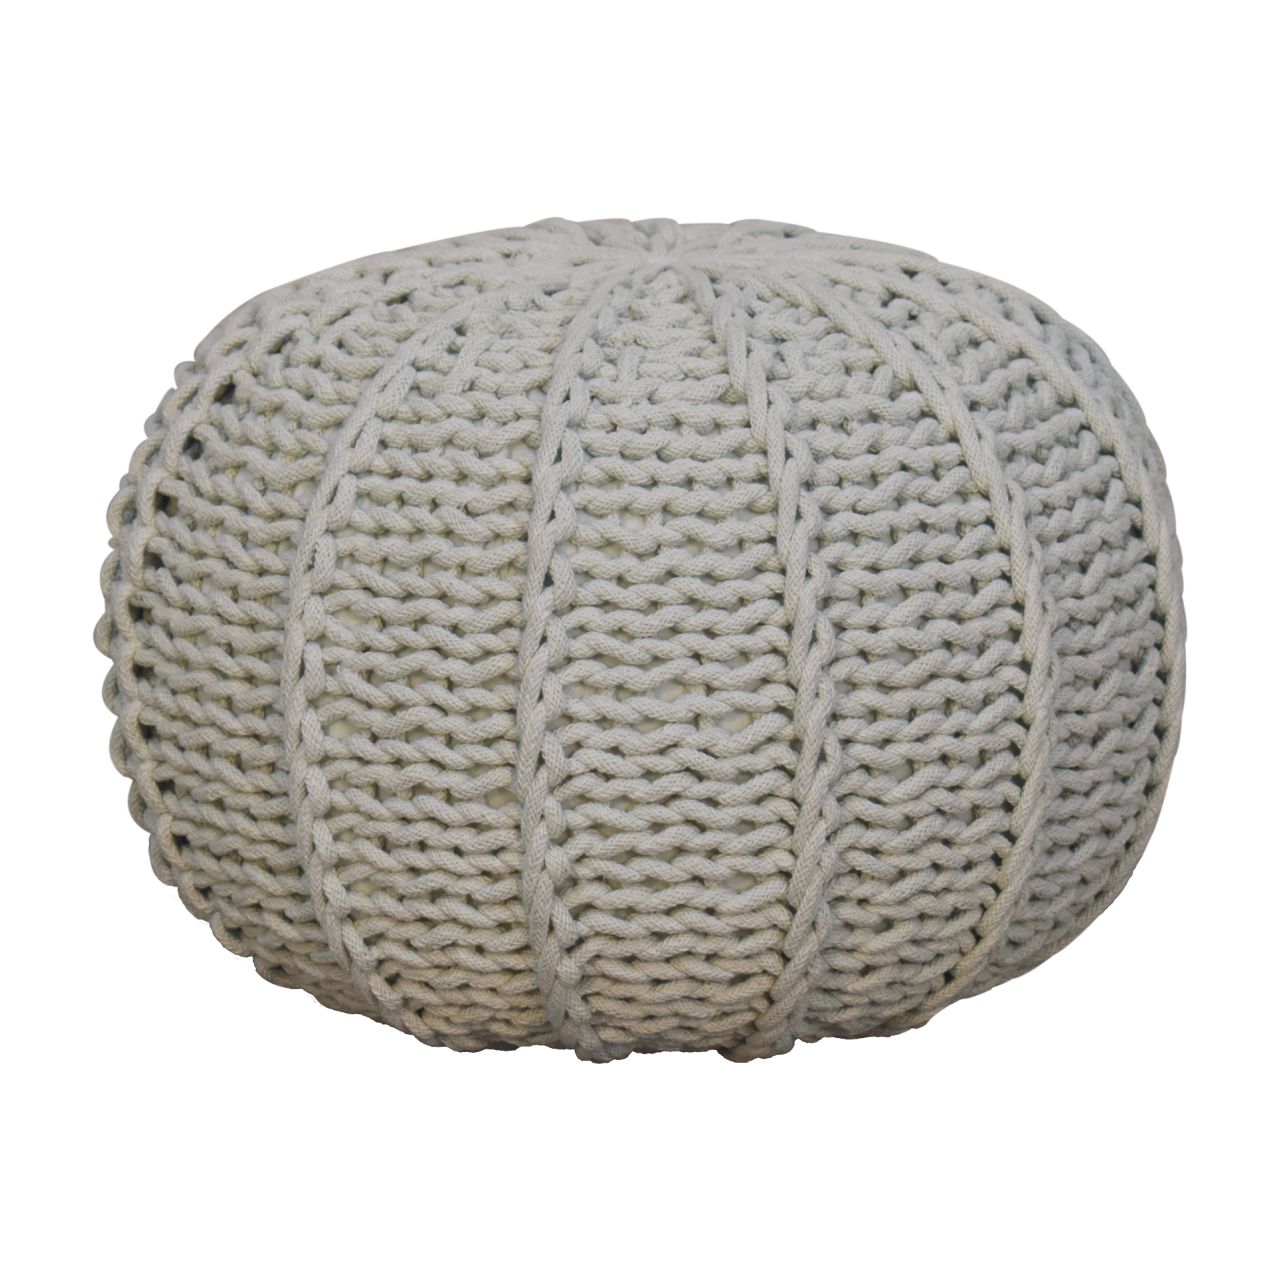 View Grey Cable Pouffe information